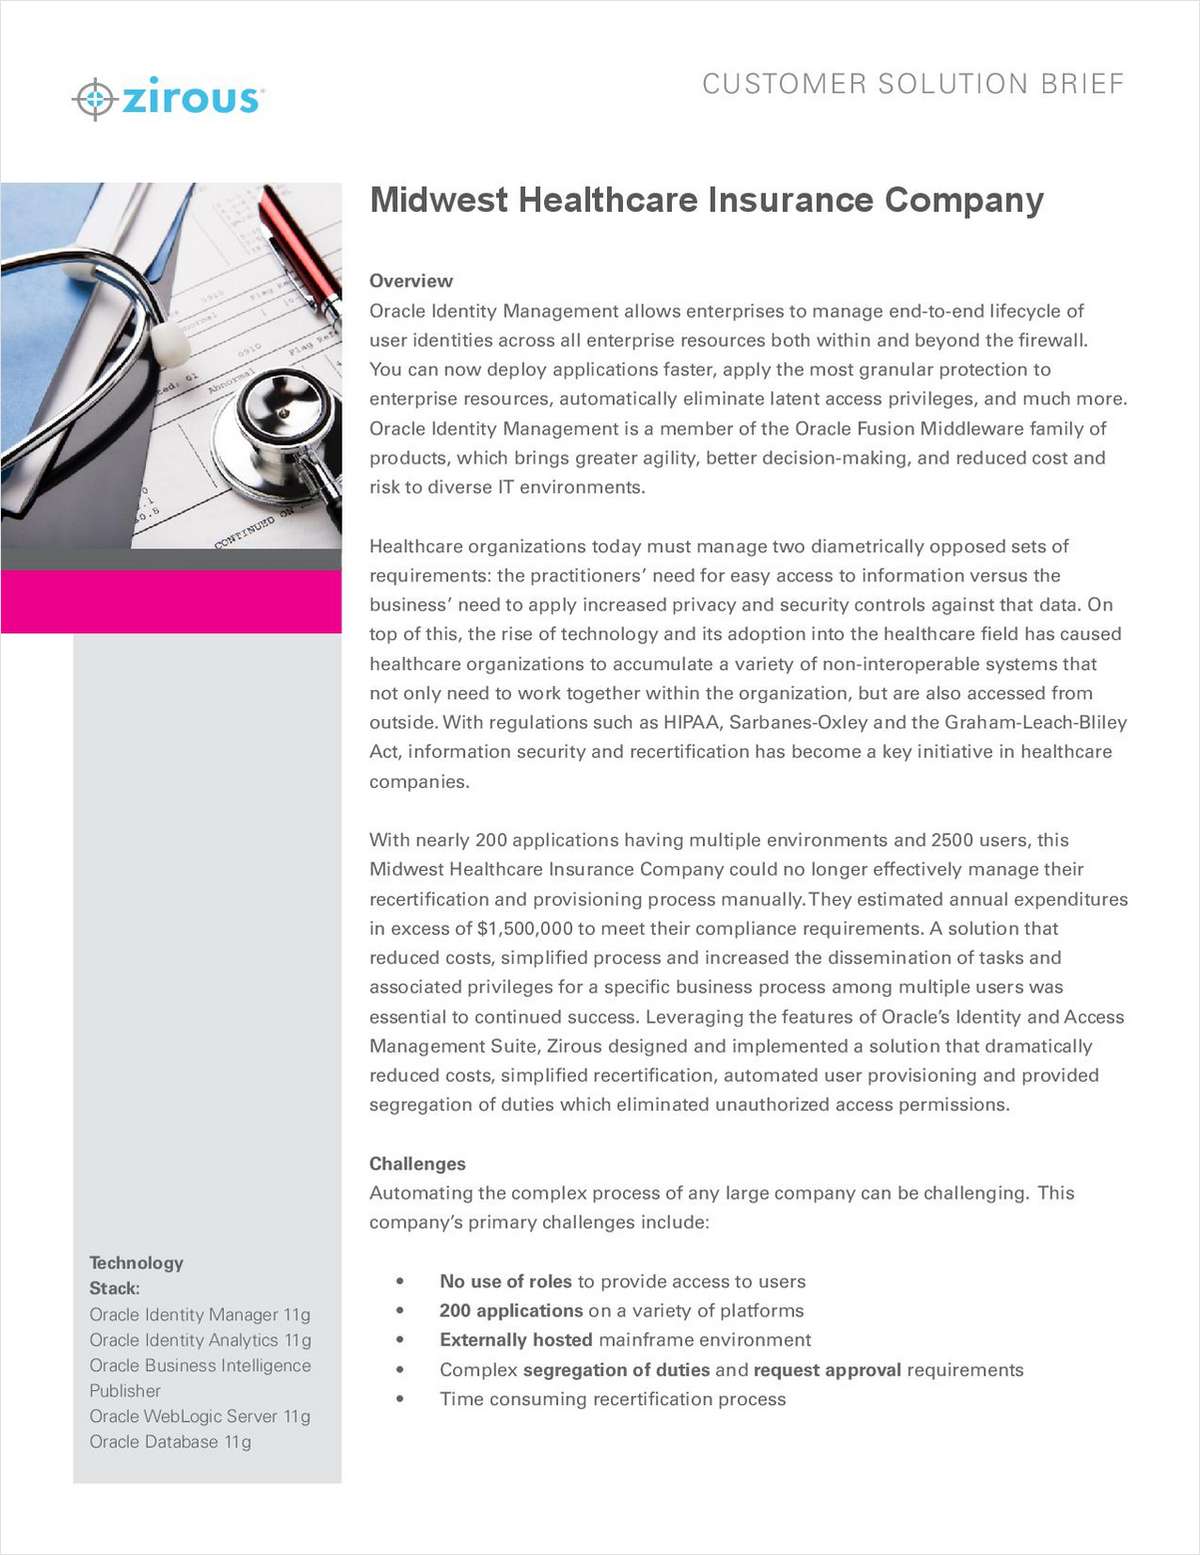 Using Oracle Identity Management: Midwest Healthcare Insurance Company Customer Solution Brief